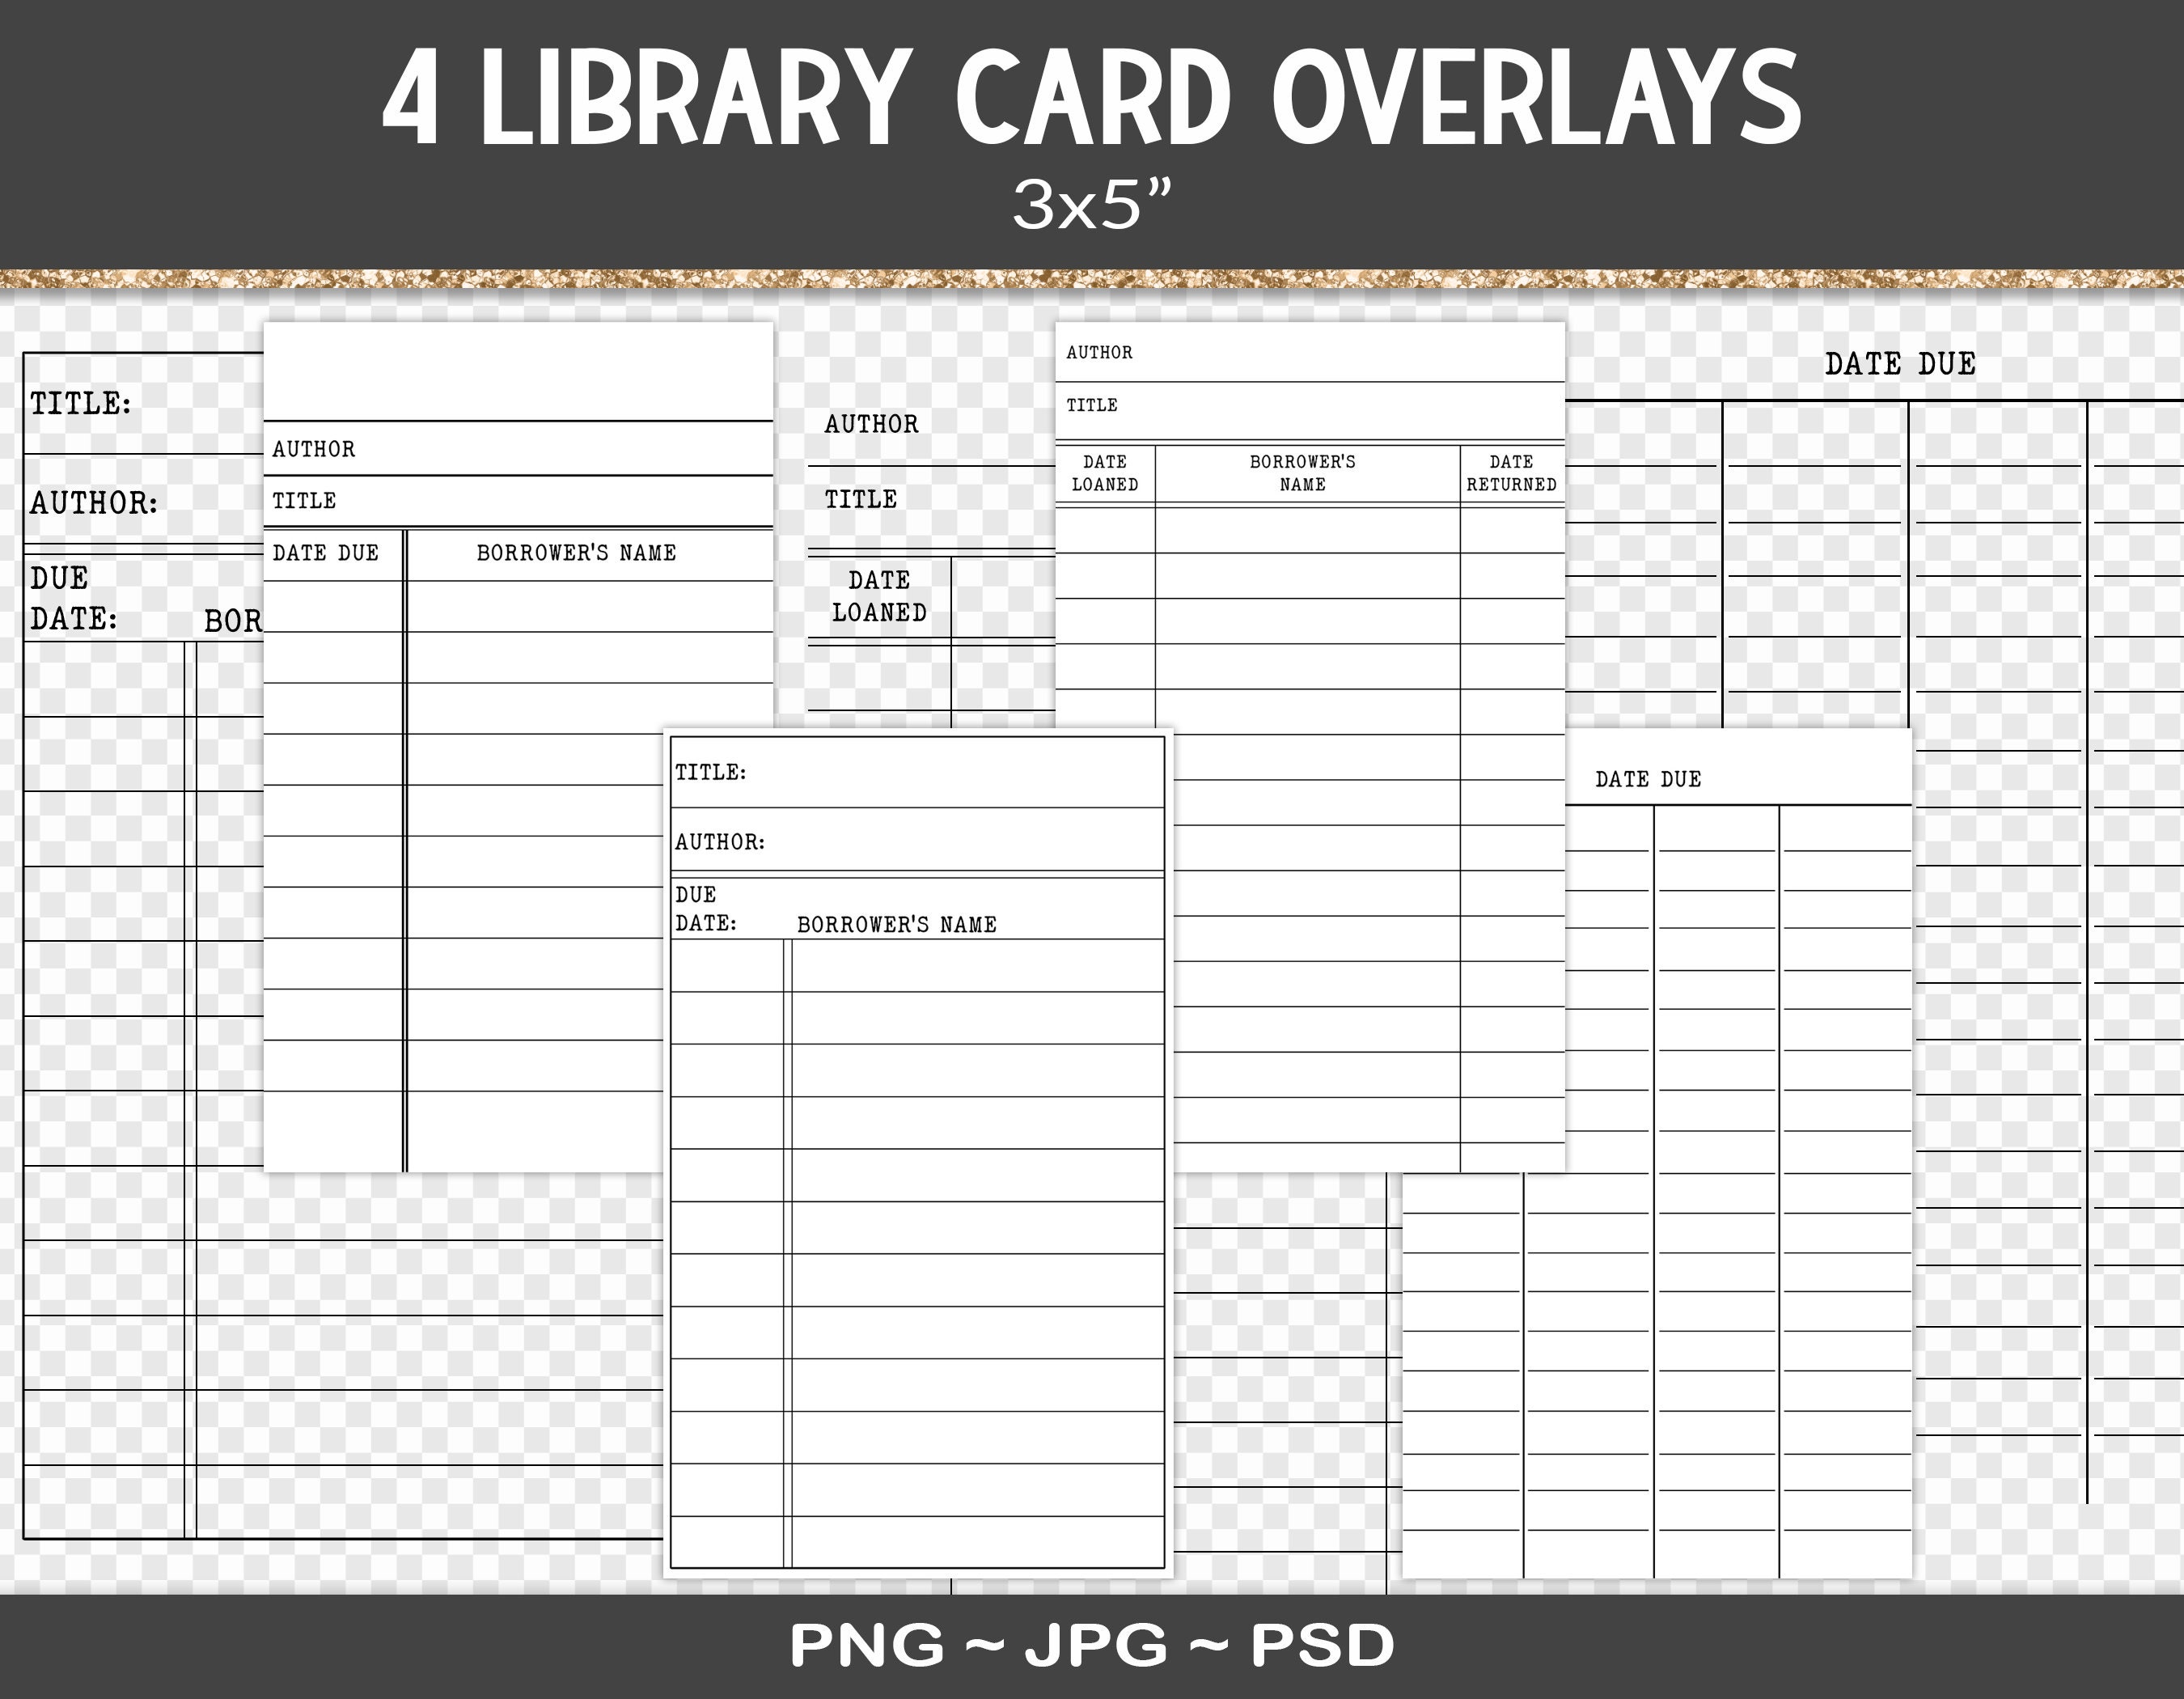 Holiday Library Cards, Christmas Library Cards, Journal Library